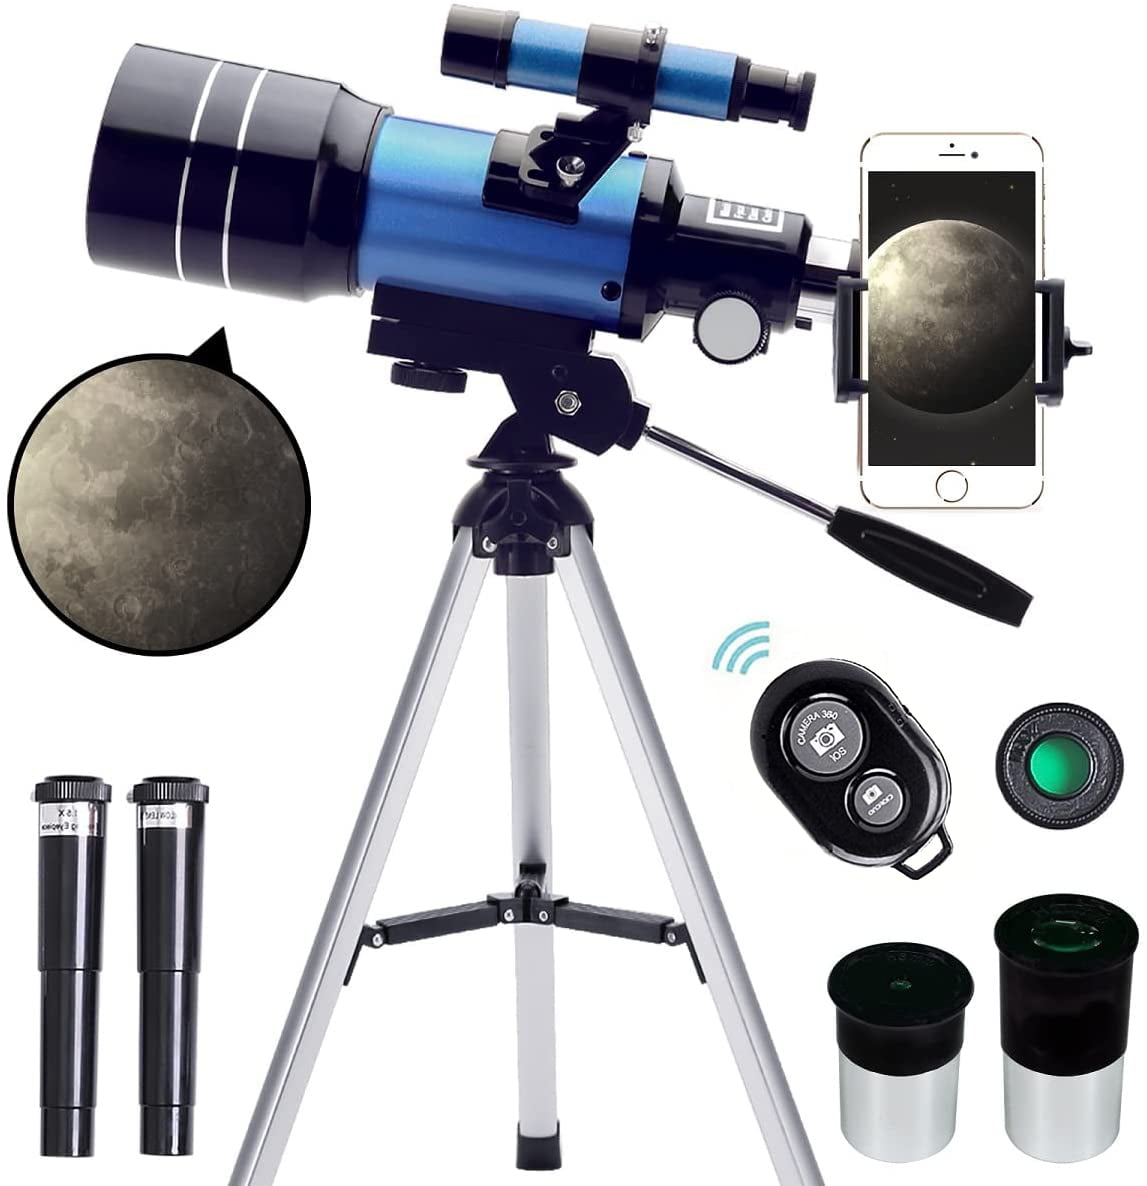 Astronomical Telescopefor for Children & Beginners,Professional Stargazing HD Refractor Telescope 400mm Focal Length,Magnification Telescope with Tripod,Easy to Carry Telescope for Outdoor 